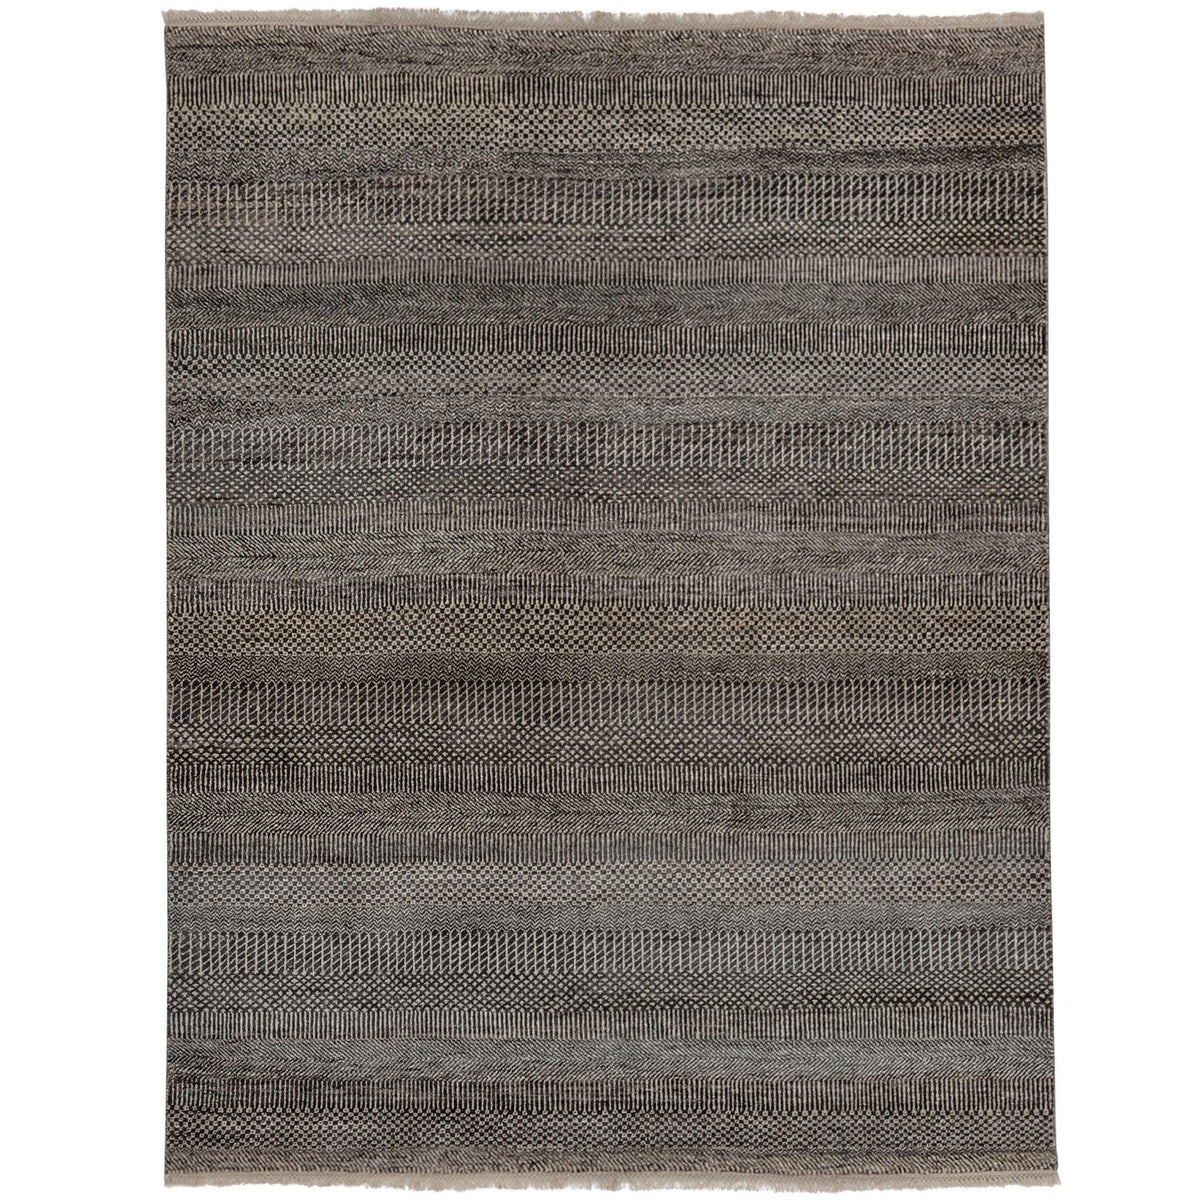 Fine Hand-knotted Wool Contemporary Rug 157cm x 211cm